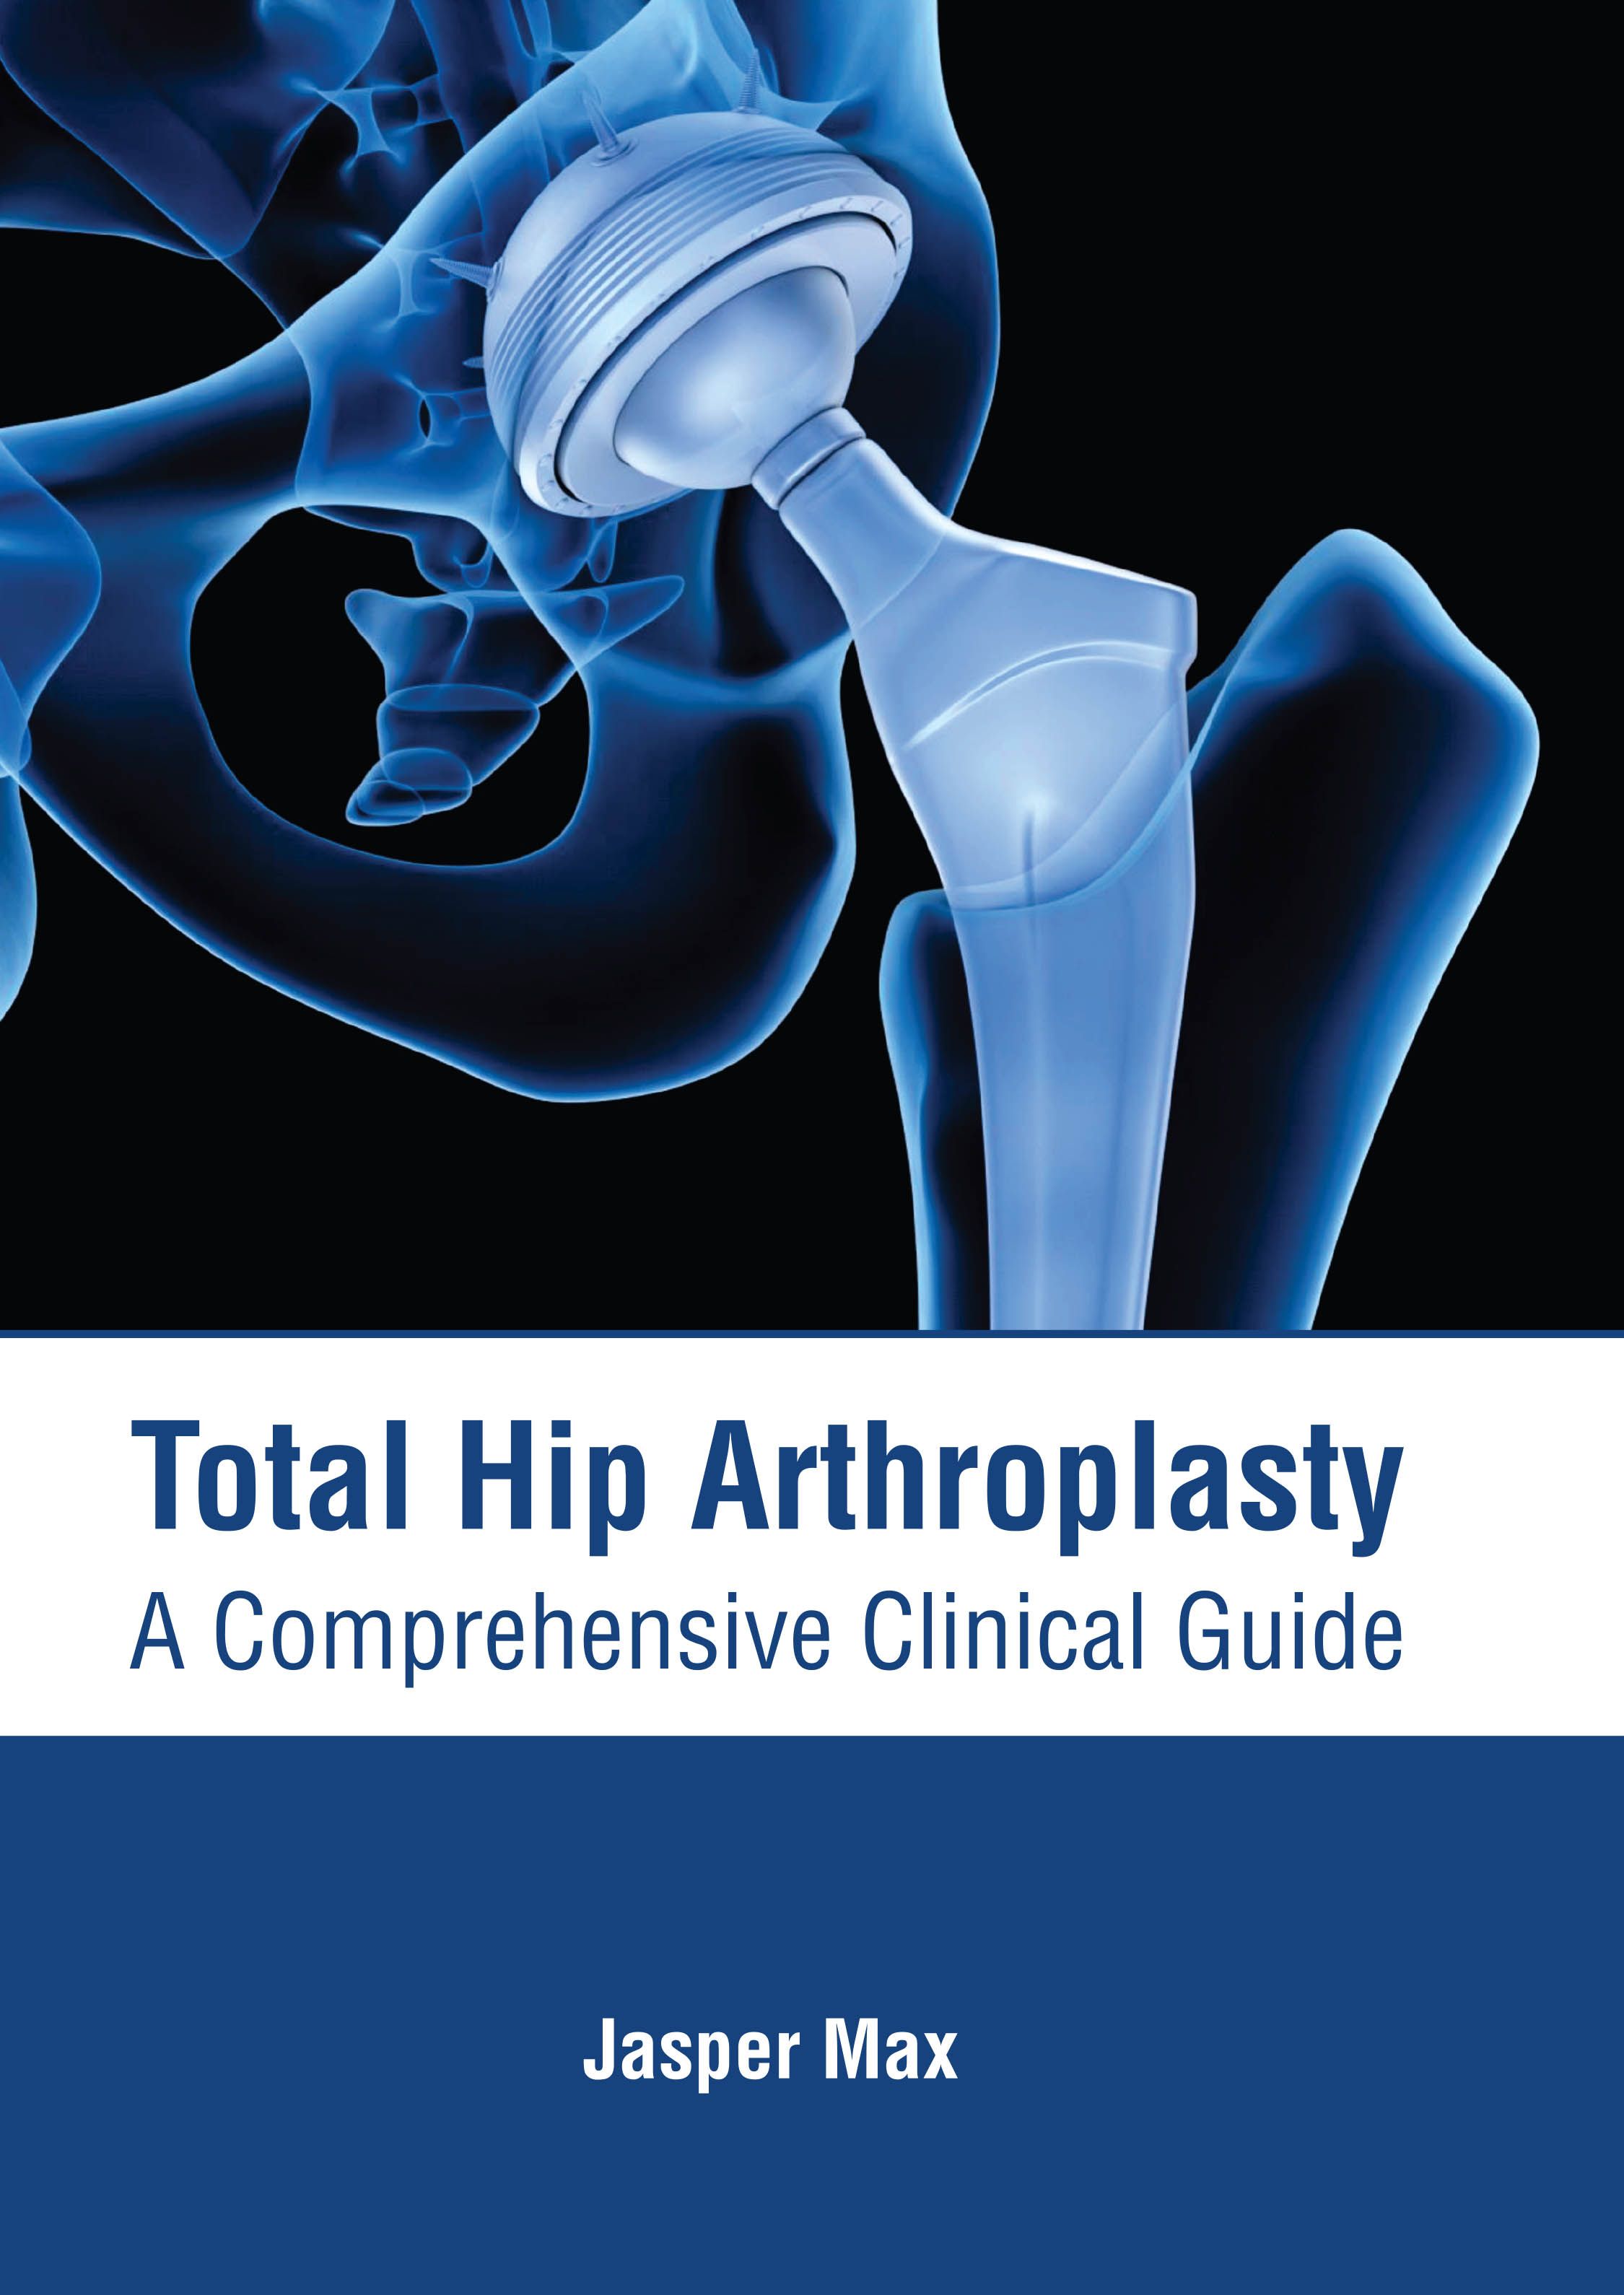 
medical-reference-books/orthopaedics/total-knee-arthroplasty-modern-techniques-in-orthopedic-surgery-9781639274048